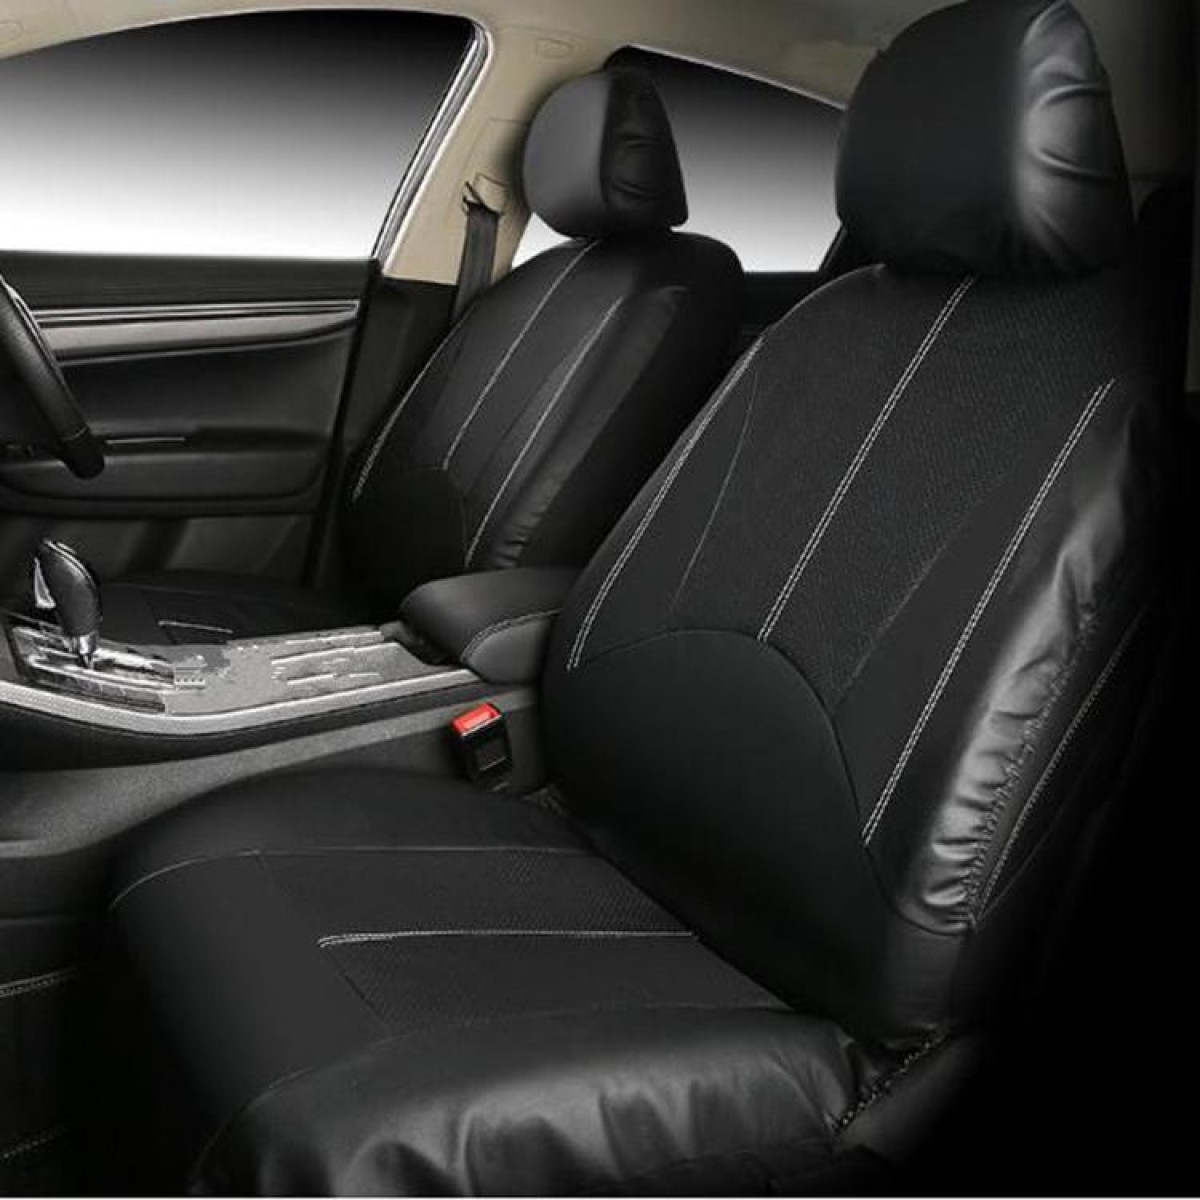 9 in 1 Universal PU Leather Four Seasons Anti-Slippery Cushion Mat Set for 5 Seat Car (Beige)